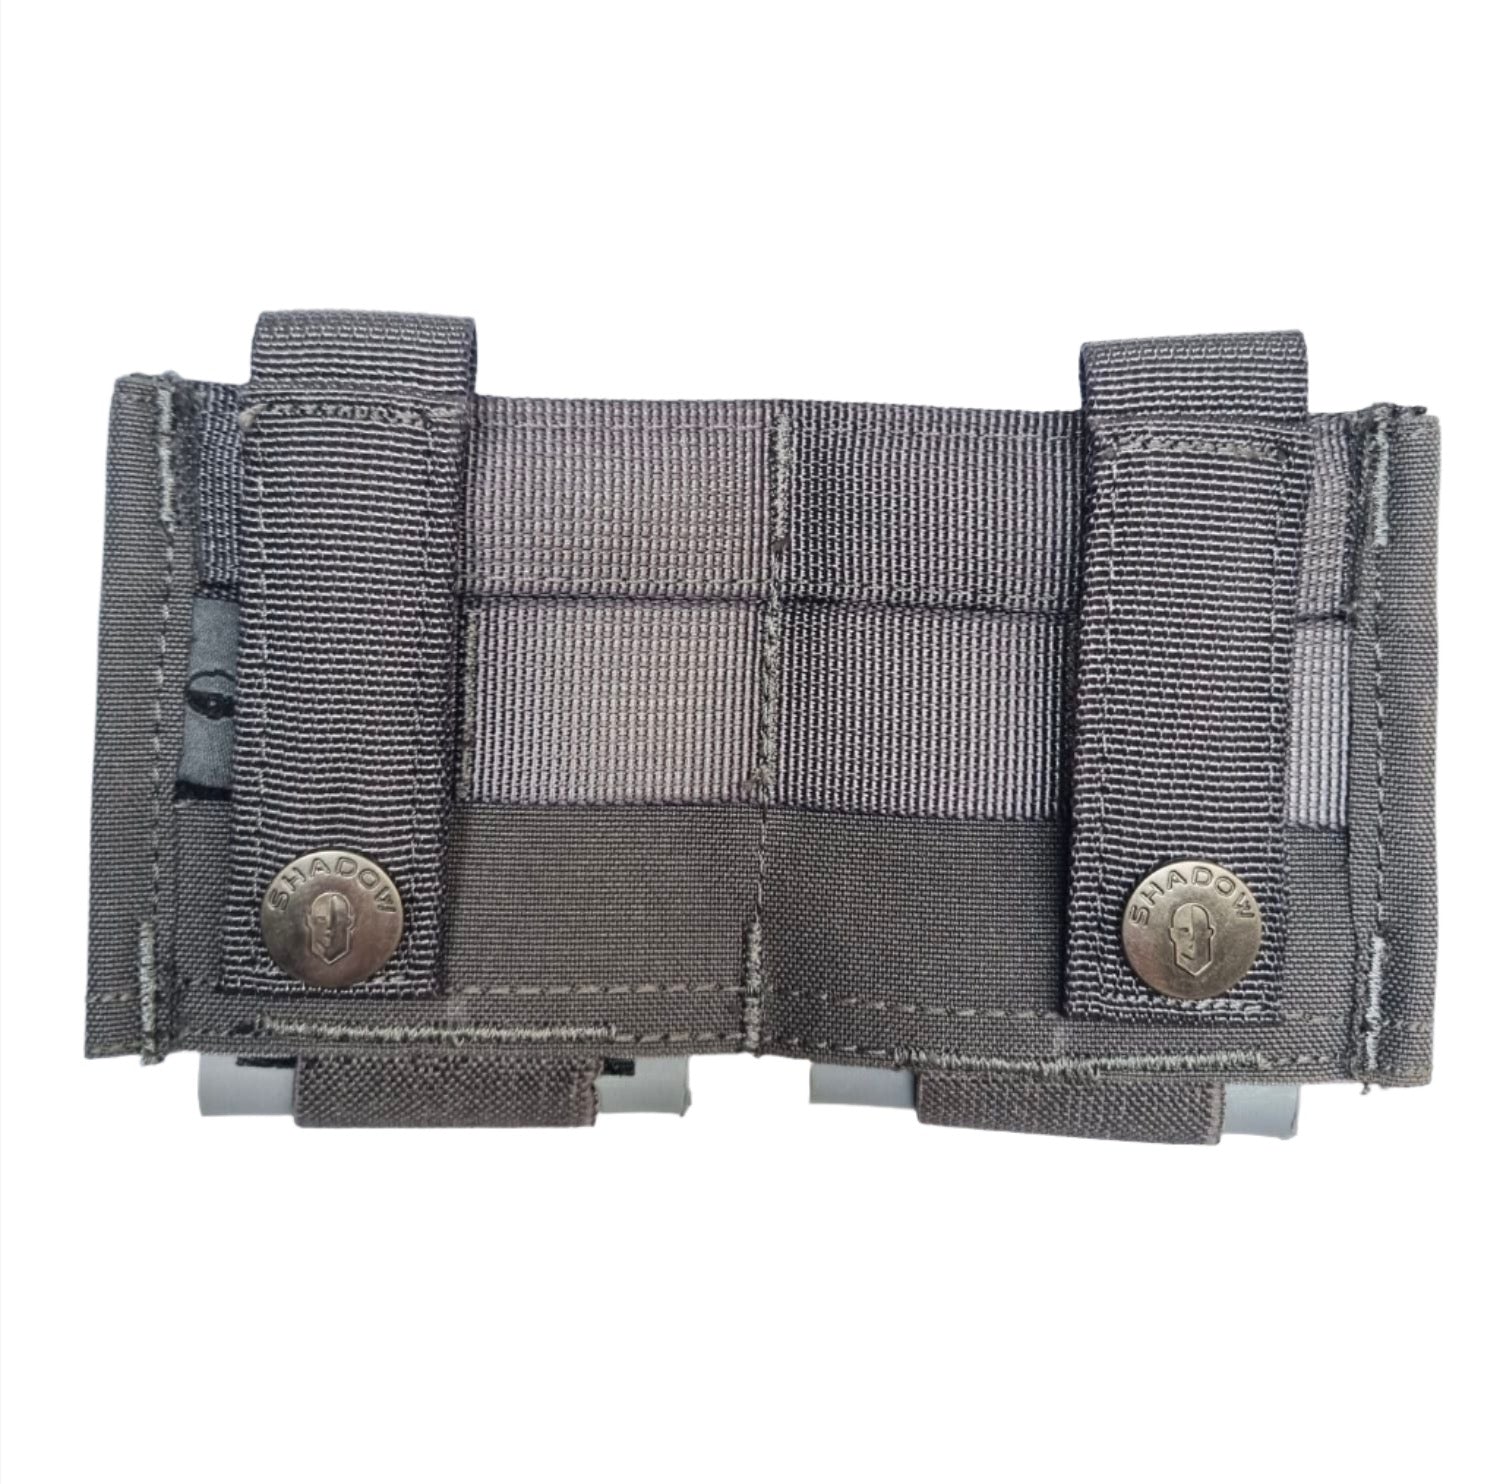 SHE-23032 GRIPTAC DOUBLE M4/M16 MAG POUCH WOLF GREY